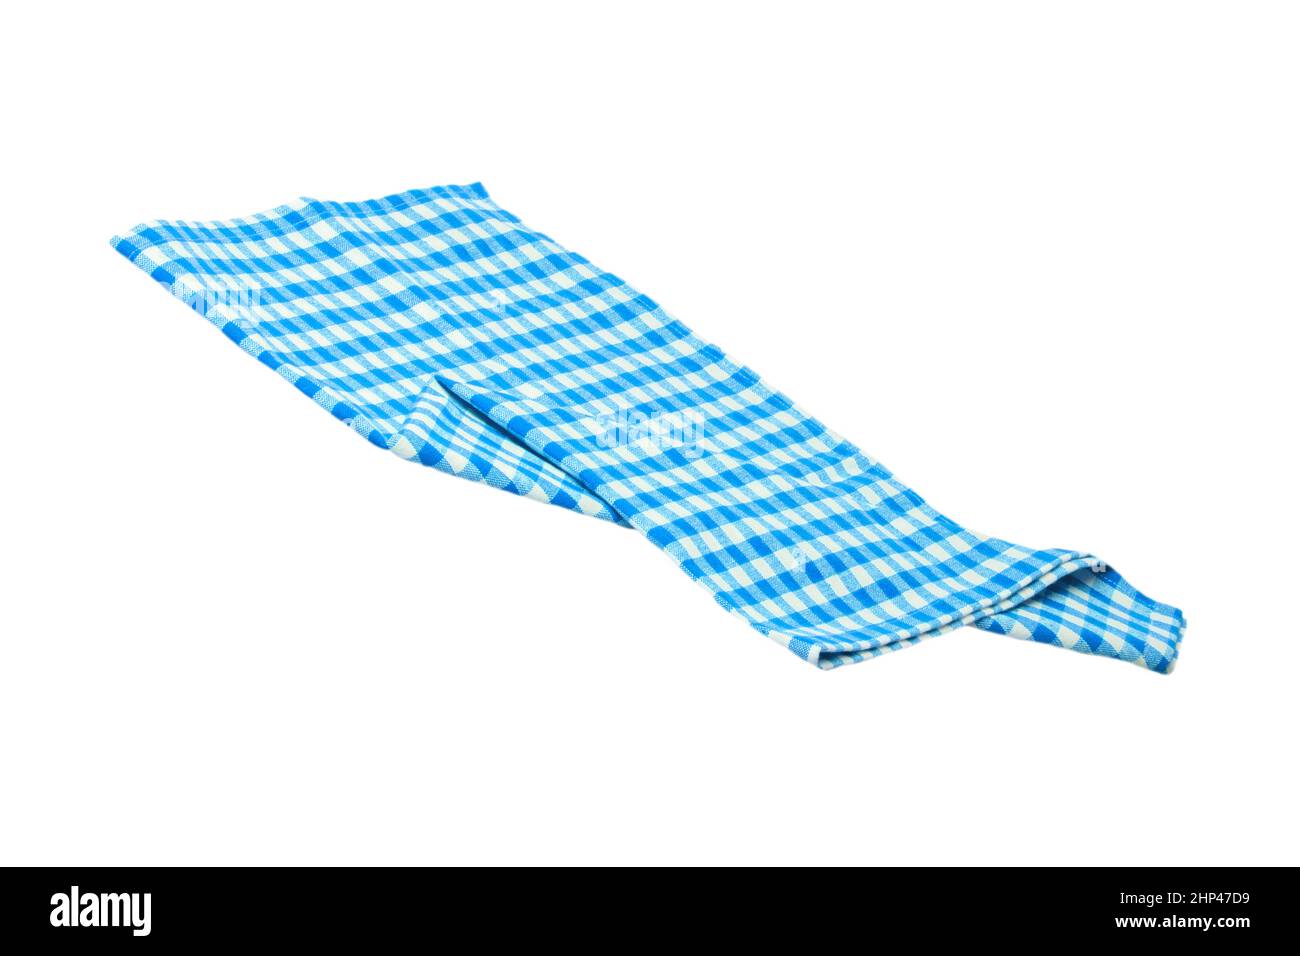 Closeup of a blue and white checkered napkin or tablecloth texture isolated on white background. Kitchen accessories. Stock Photo